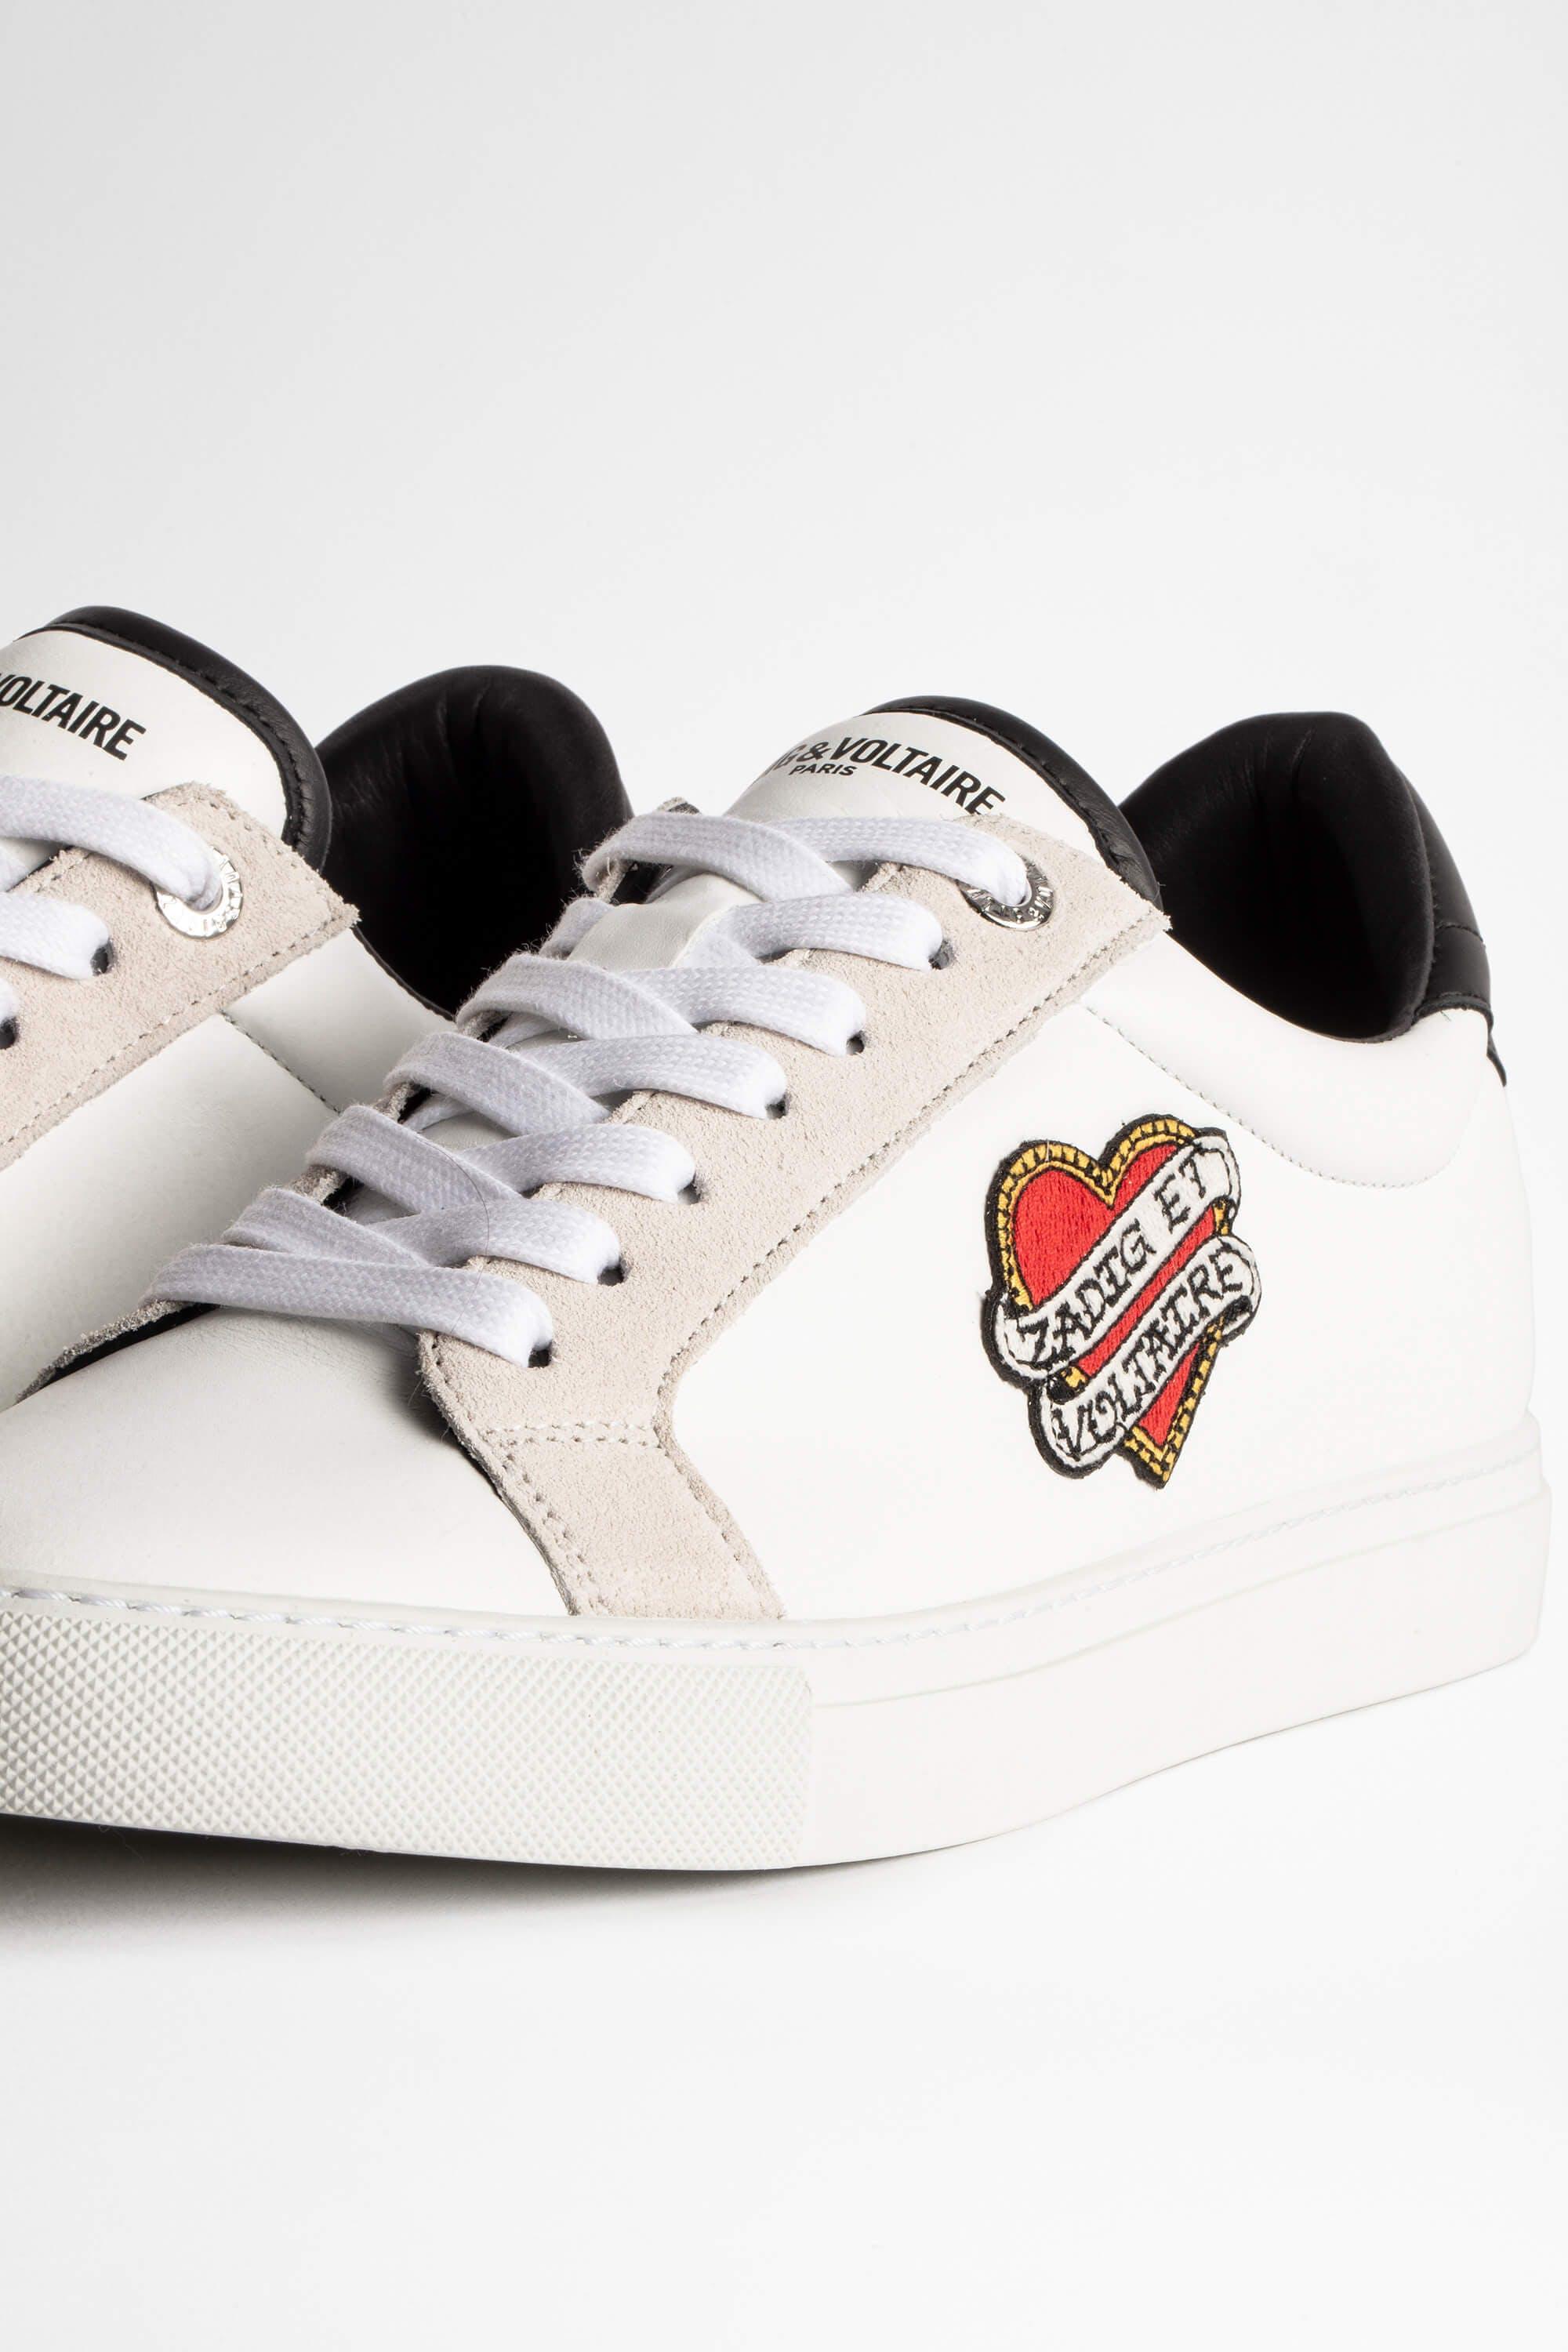 & Voltaire Zv1747 Heart Patch Sneakers White |